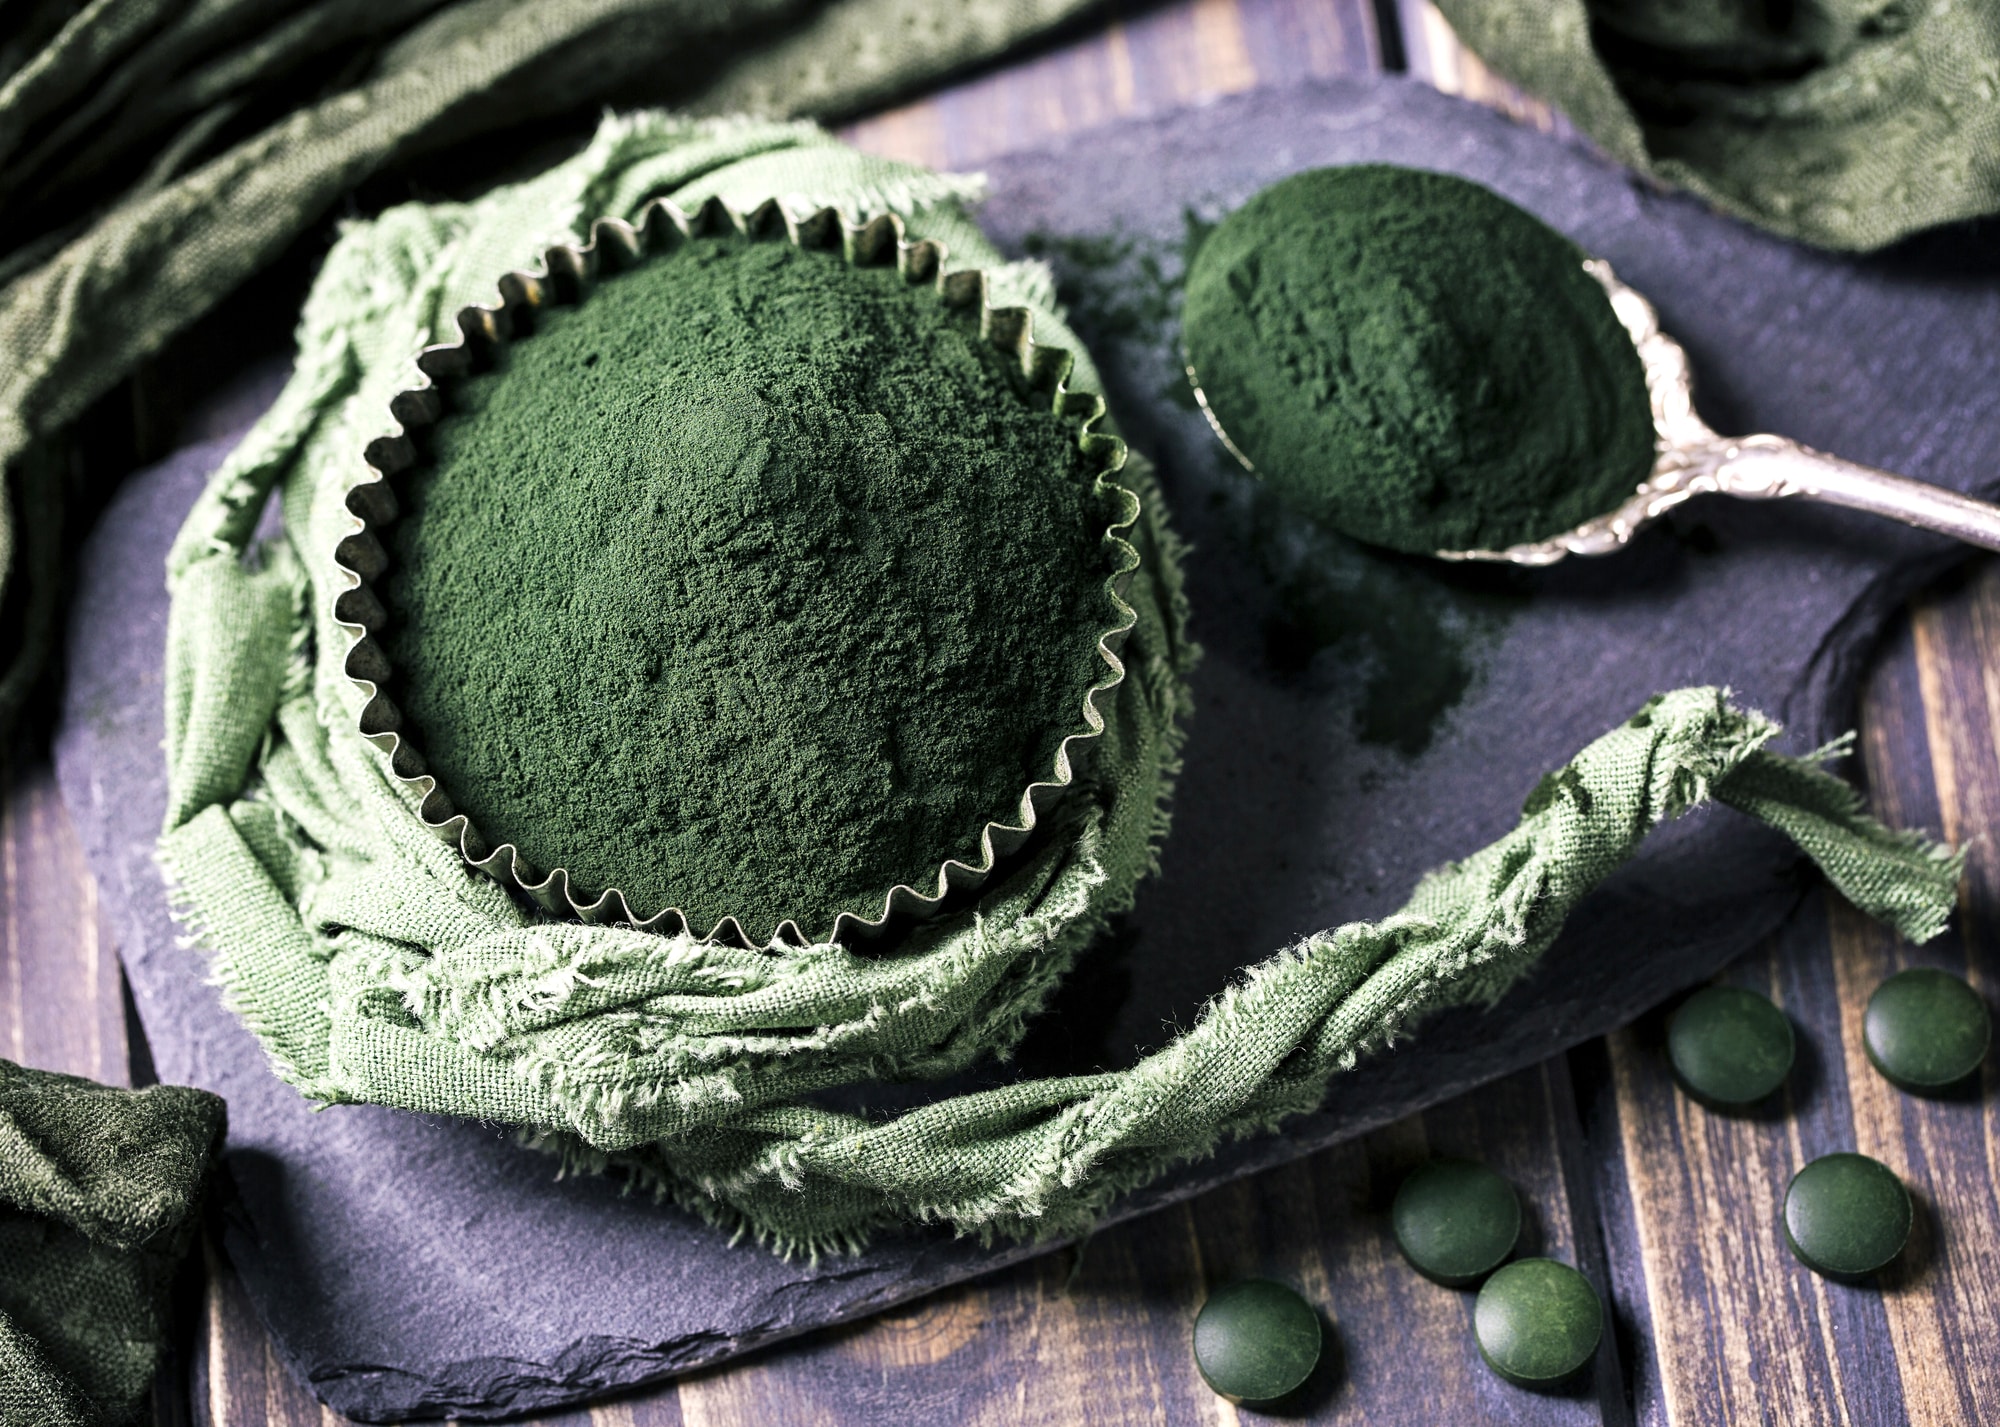 Spirulina for dogs (effect and dosage explained)